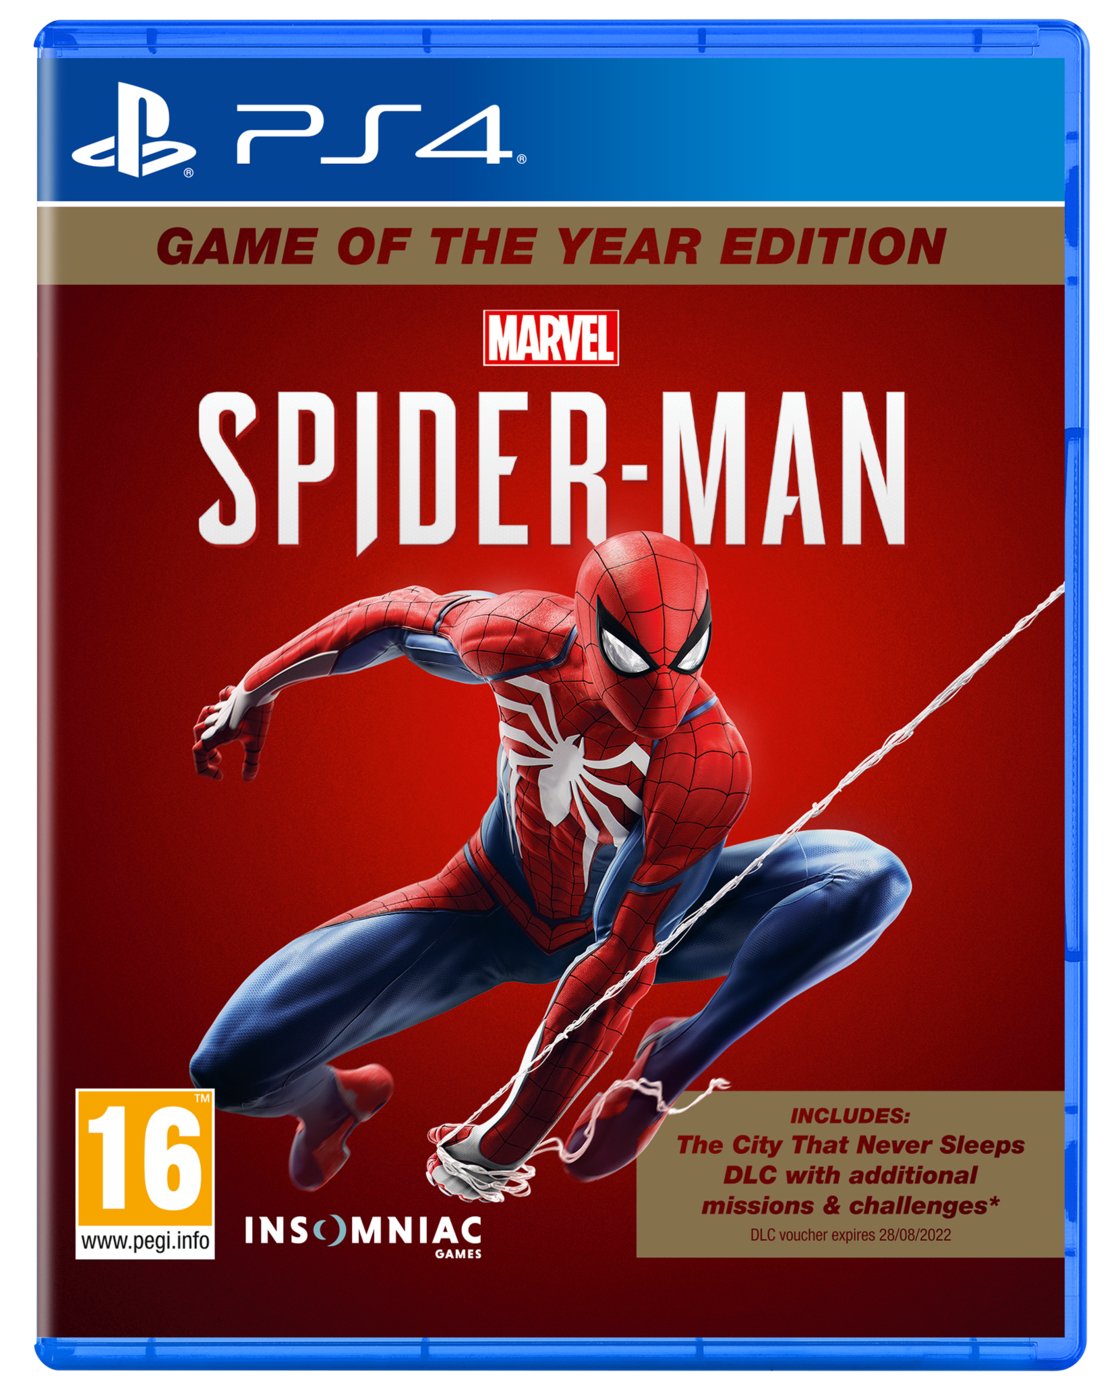 ps4 spiderman age rating